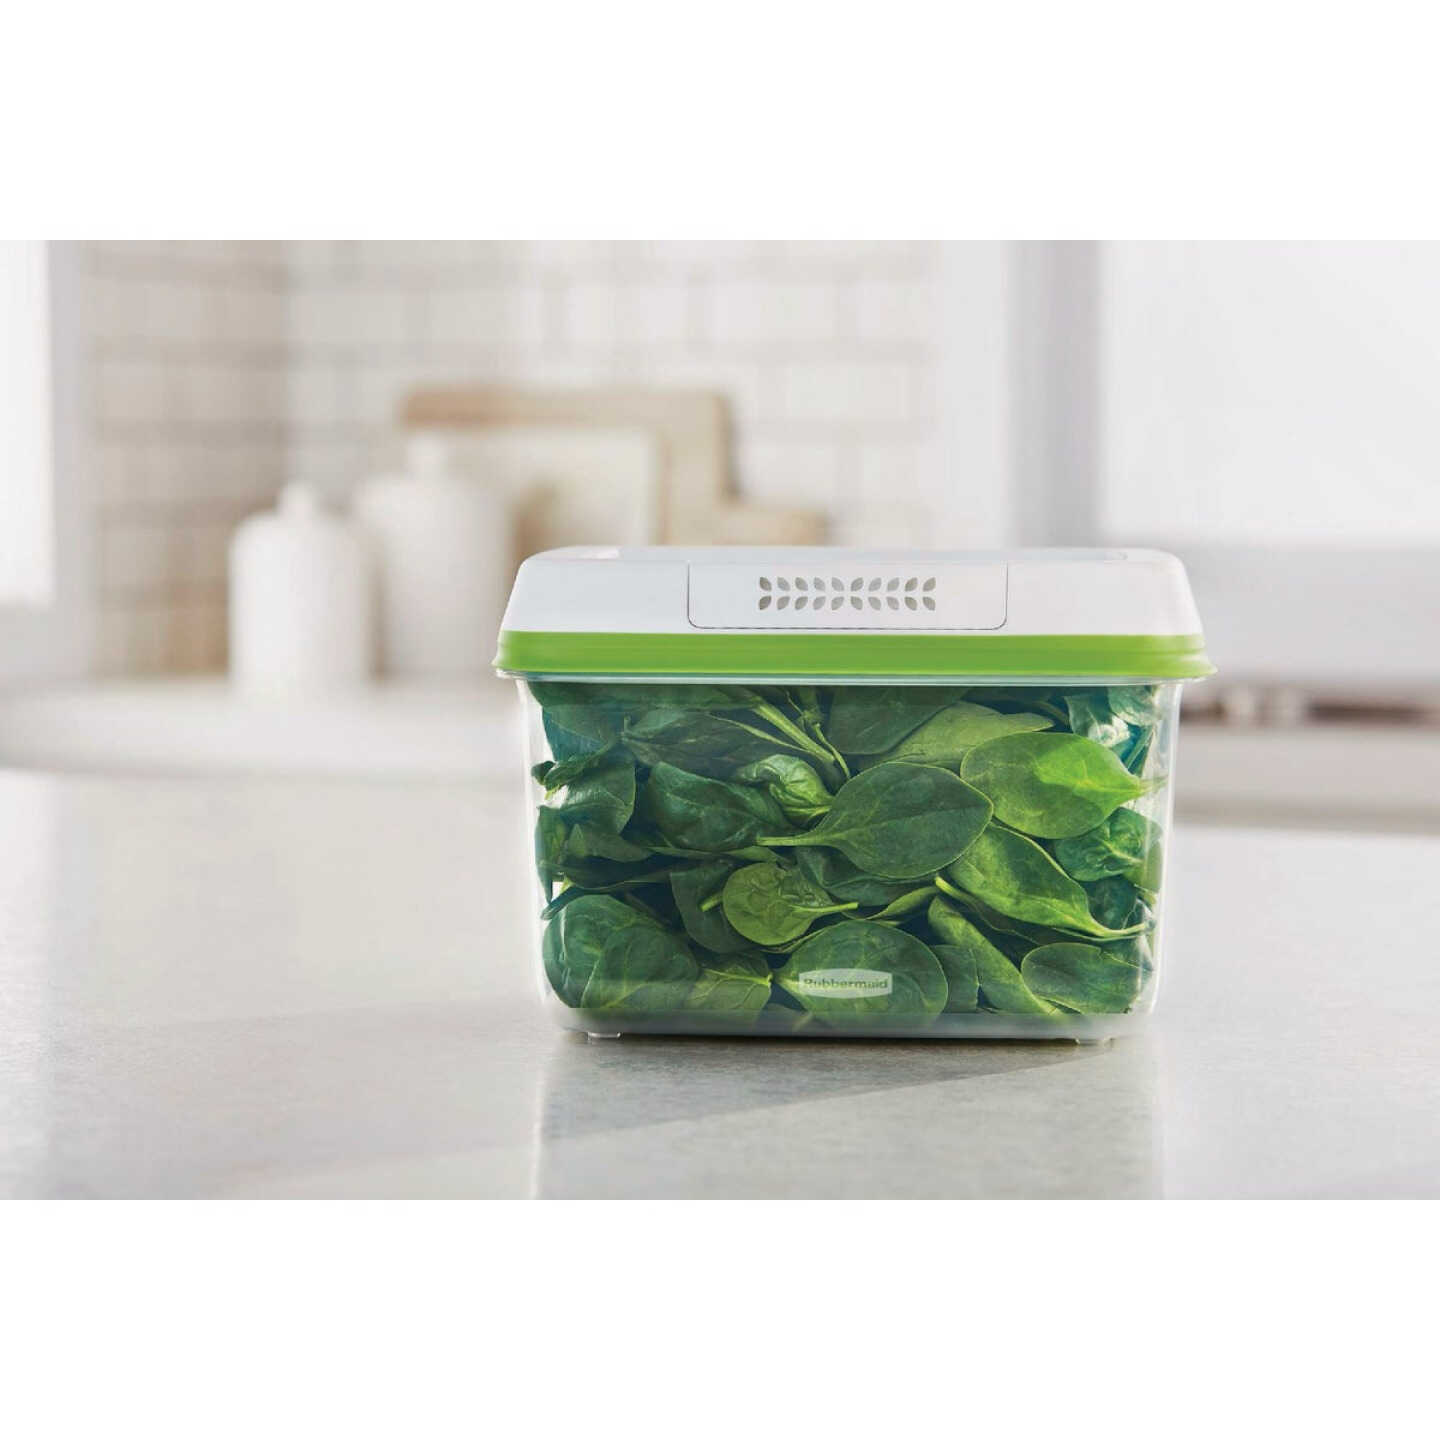 Rubbermaid FreshWorks Review: The Best Produce Storage Containers